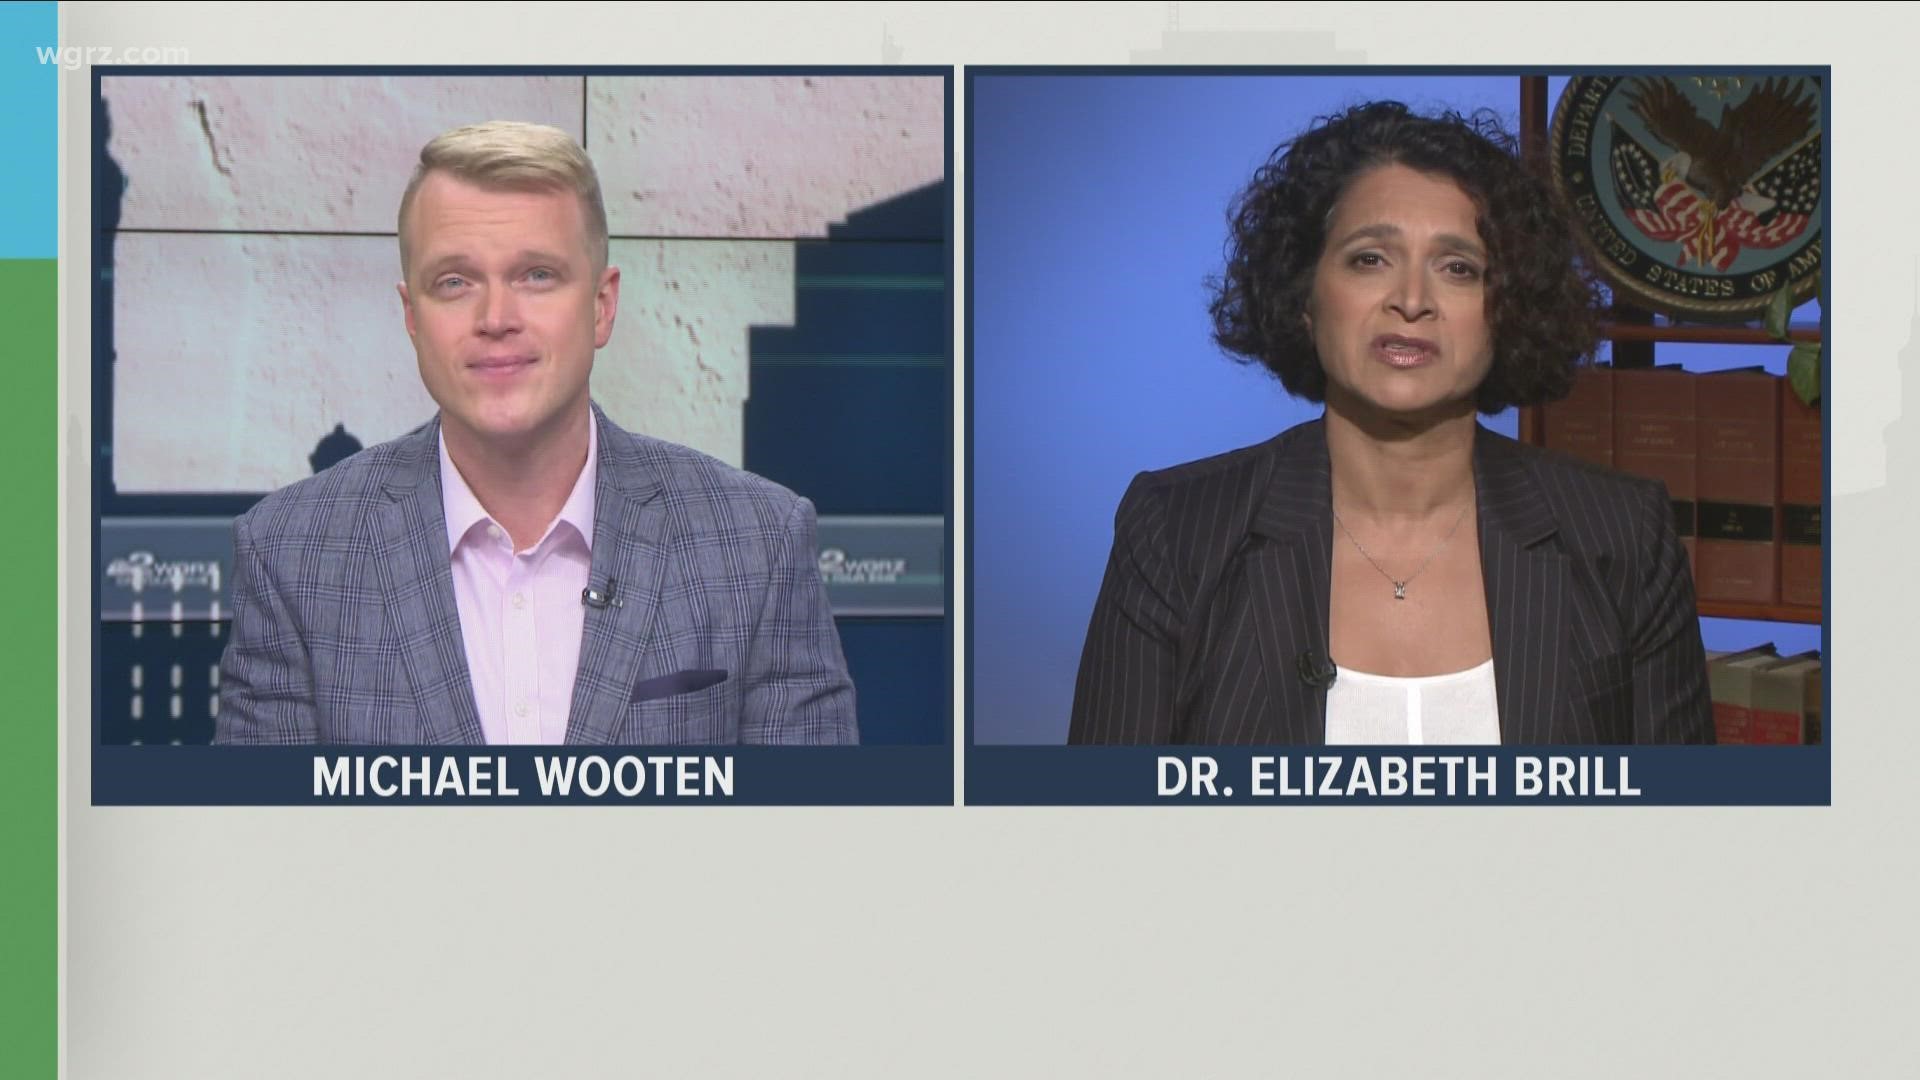 Dr. Elizabeth Brill is the deputy chief medical officer for the entire VA health system and she talks about how health care could be affected by the vaccine mandates